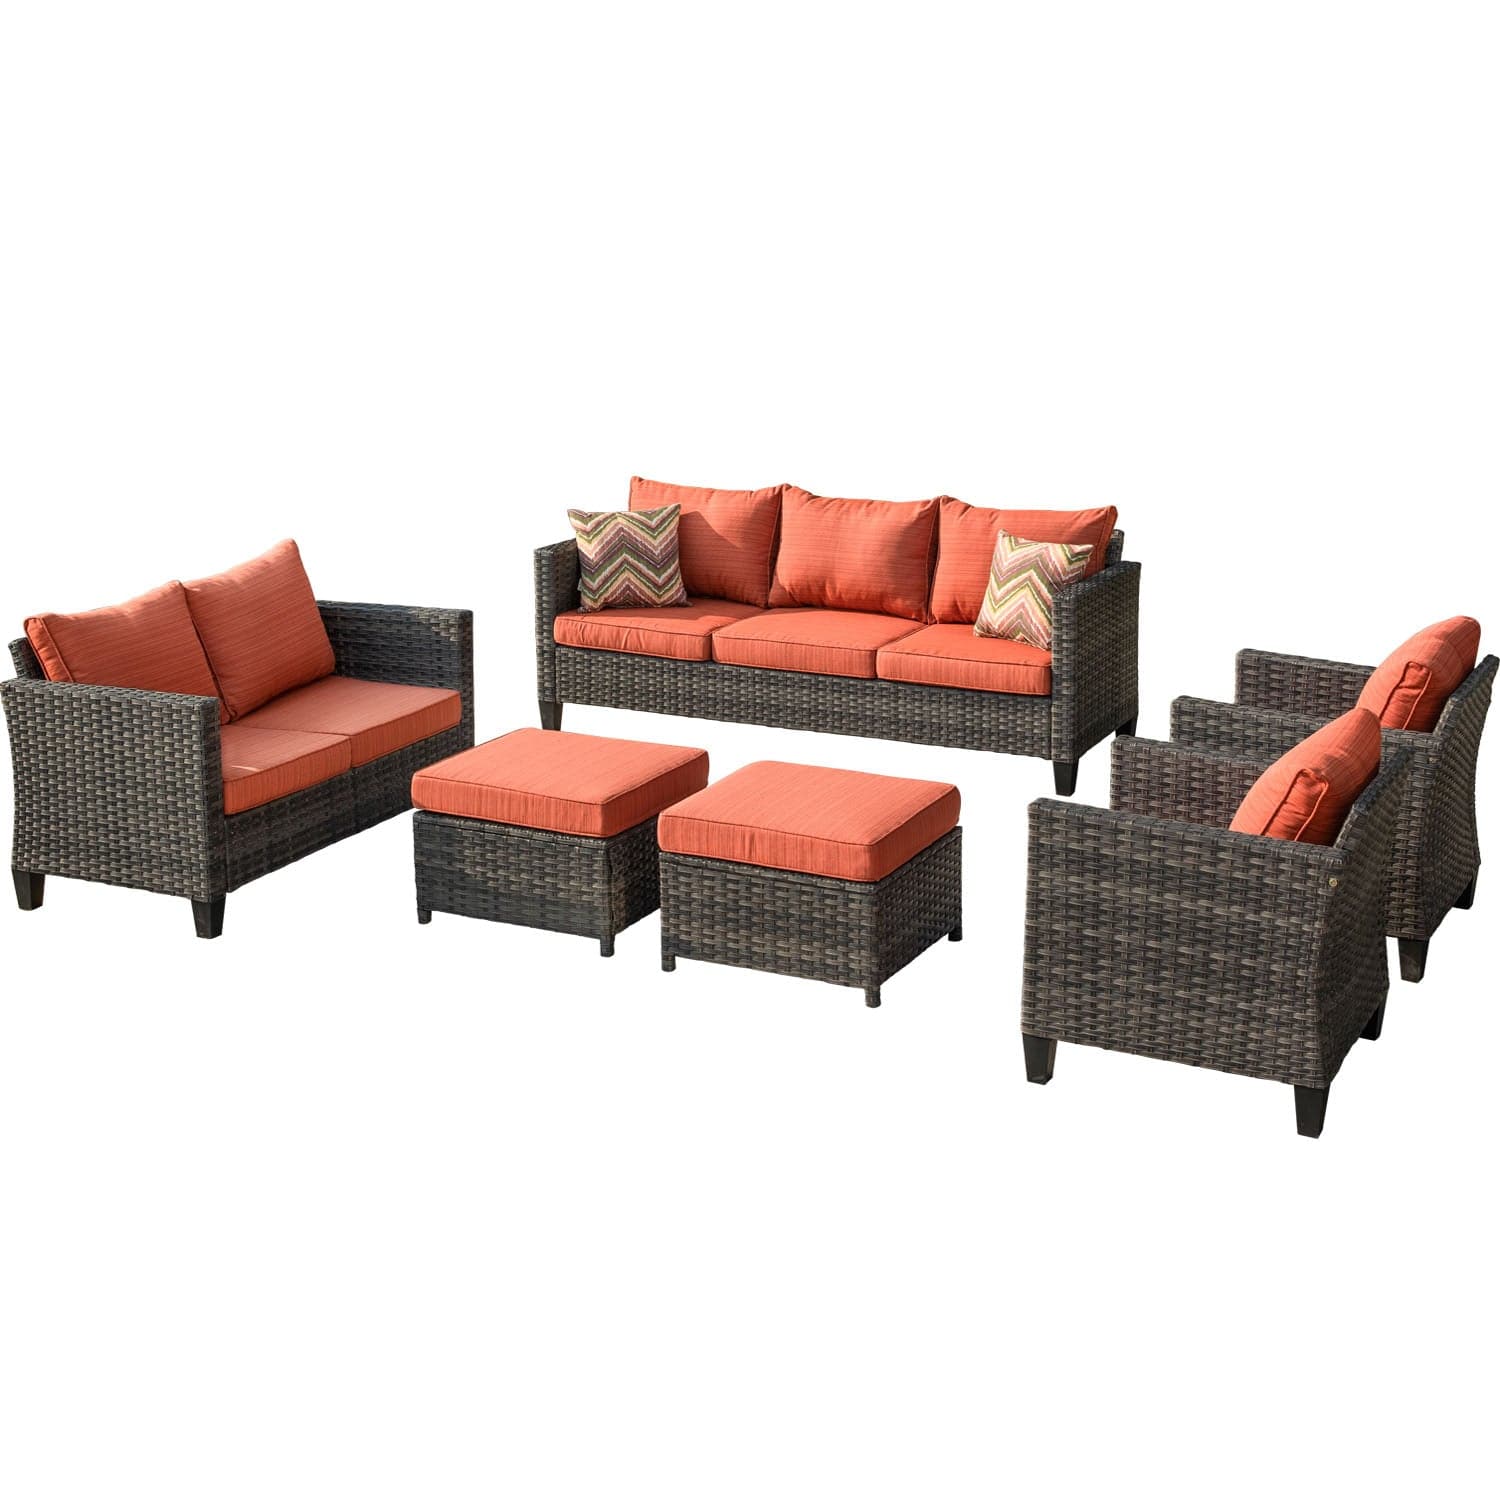 Ovios Patio Furniture Set New Vultros 7-Person High Back Sectional Sofa with Cushions